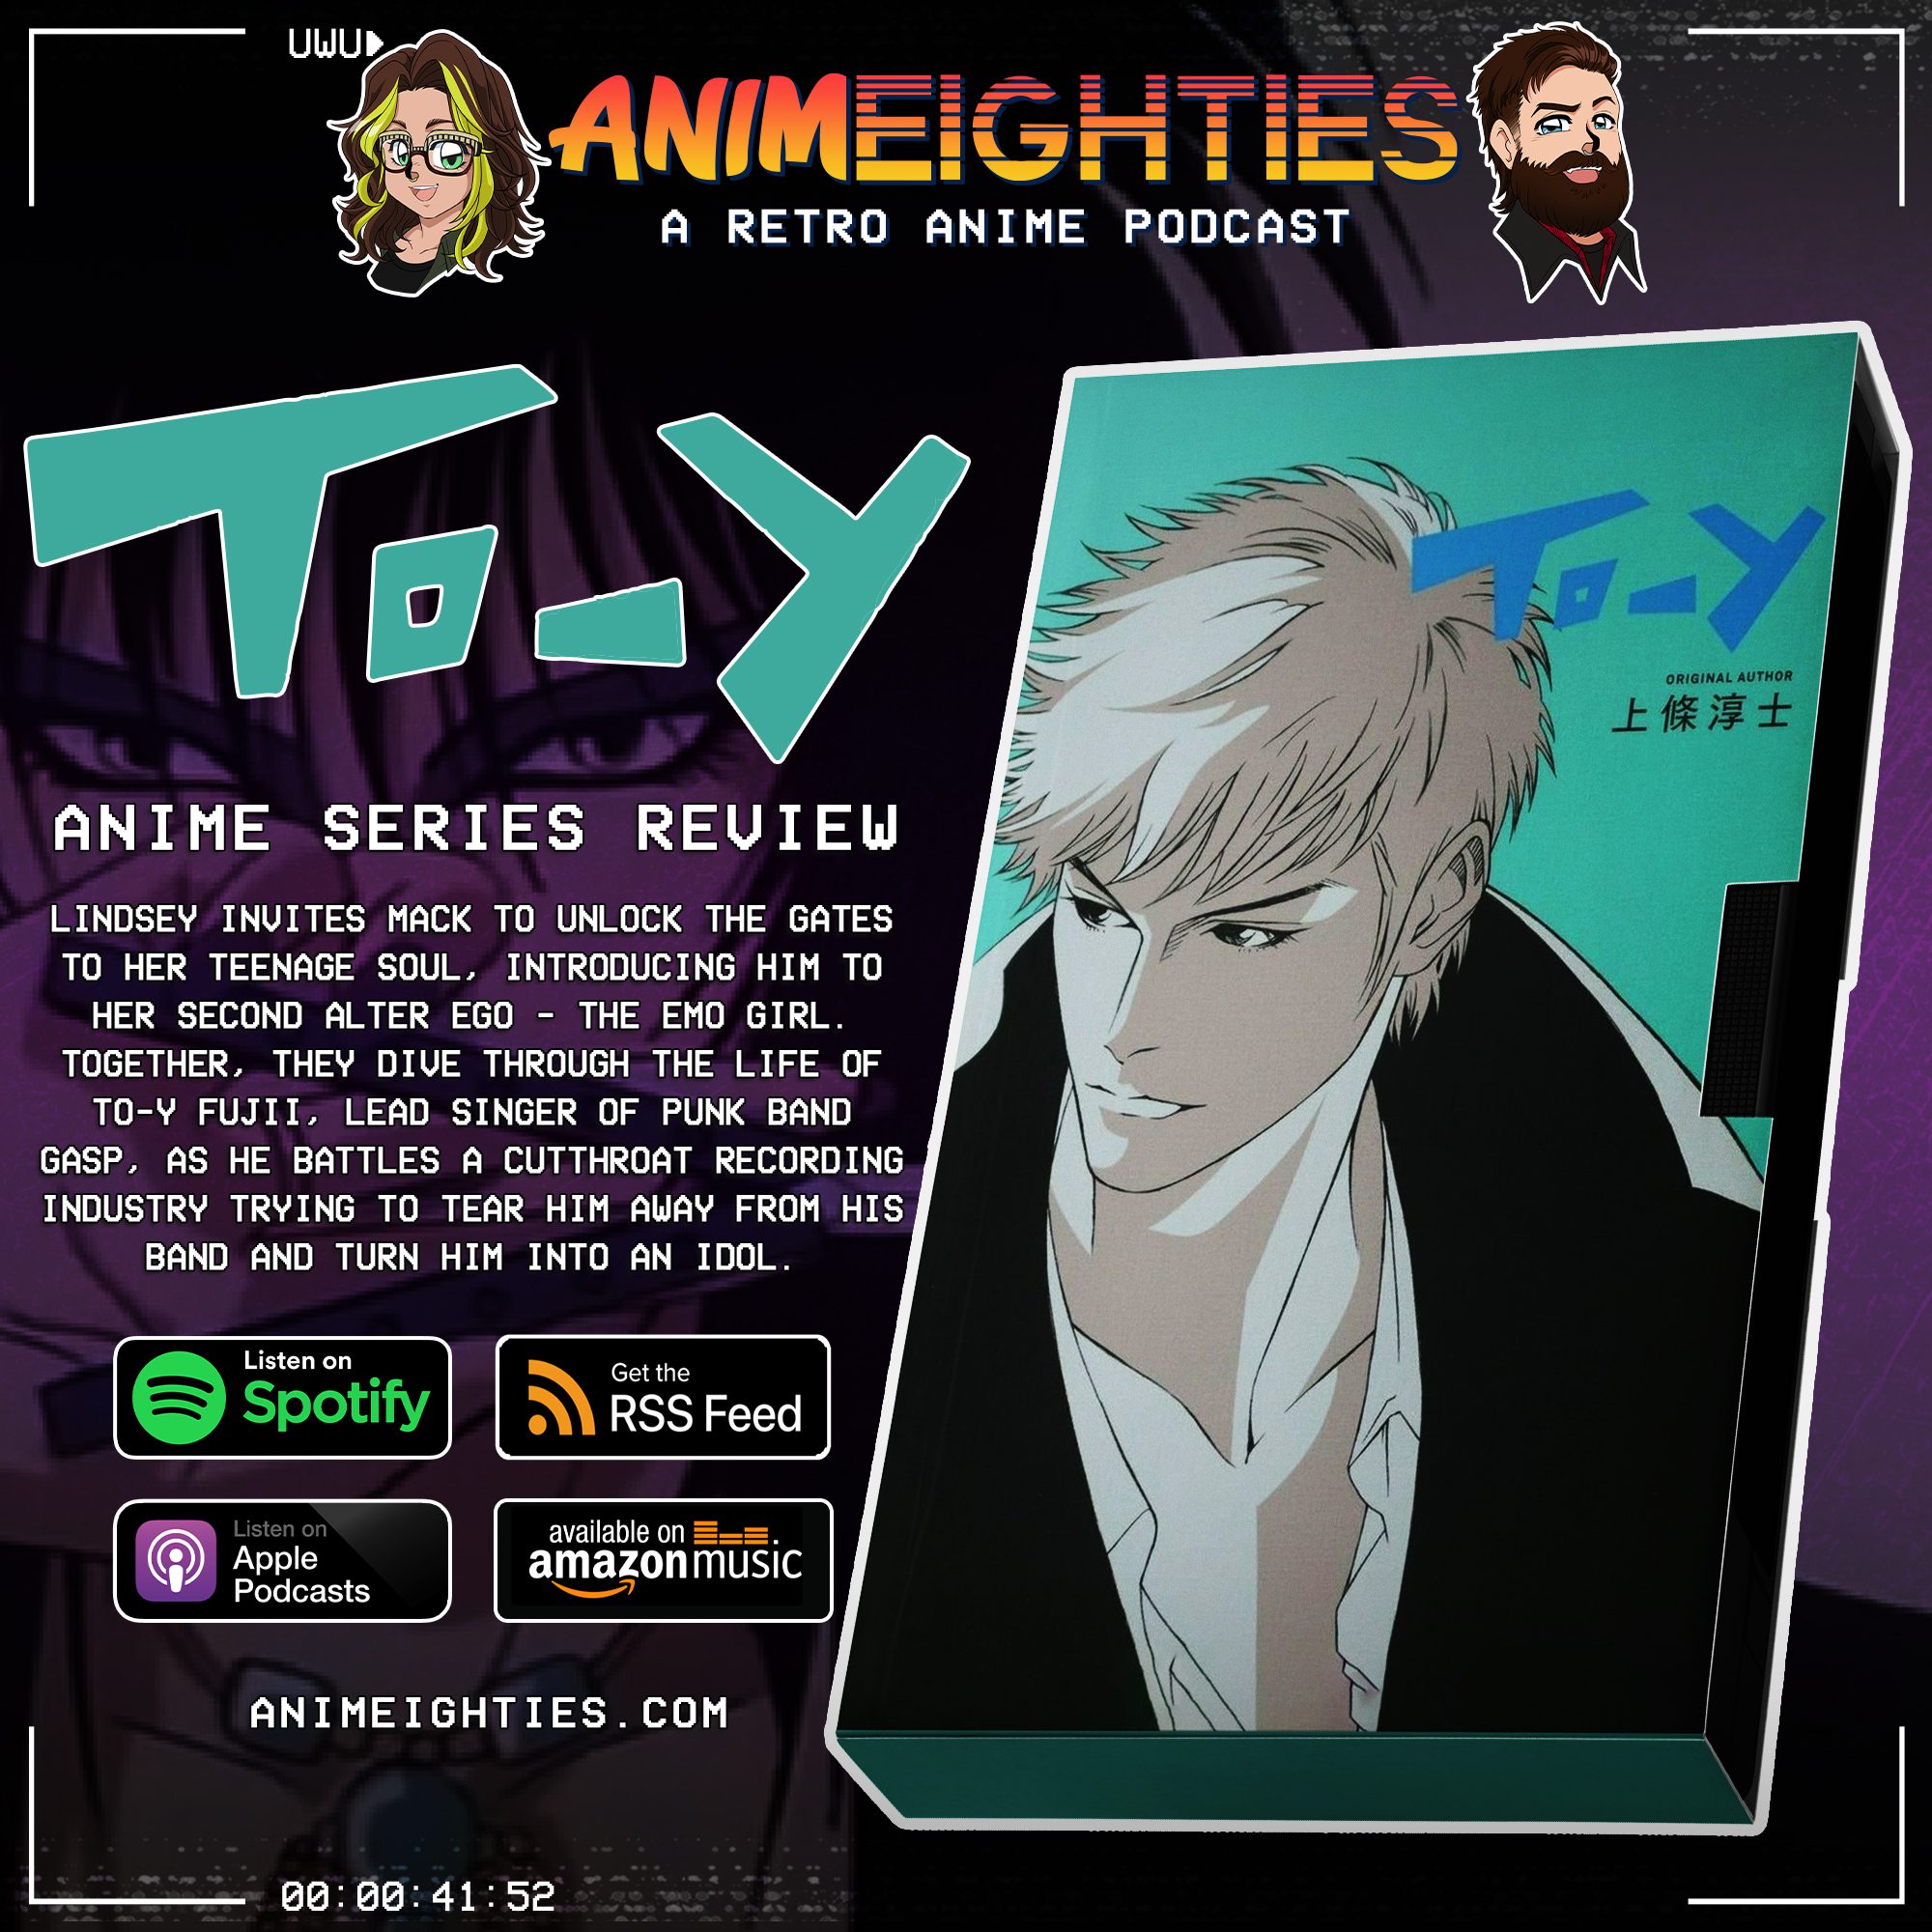 The Pretty Pretentious Anime Podcast on Apple Podcasts | Anime, Anime  chibi, Anime icons